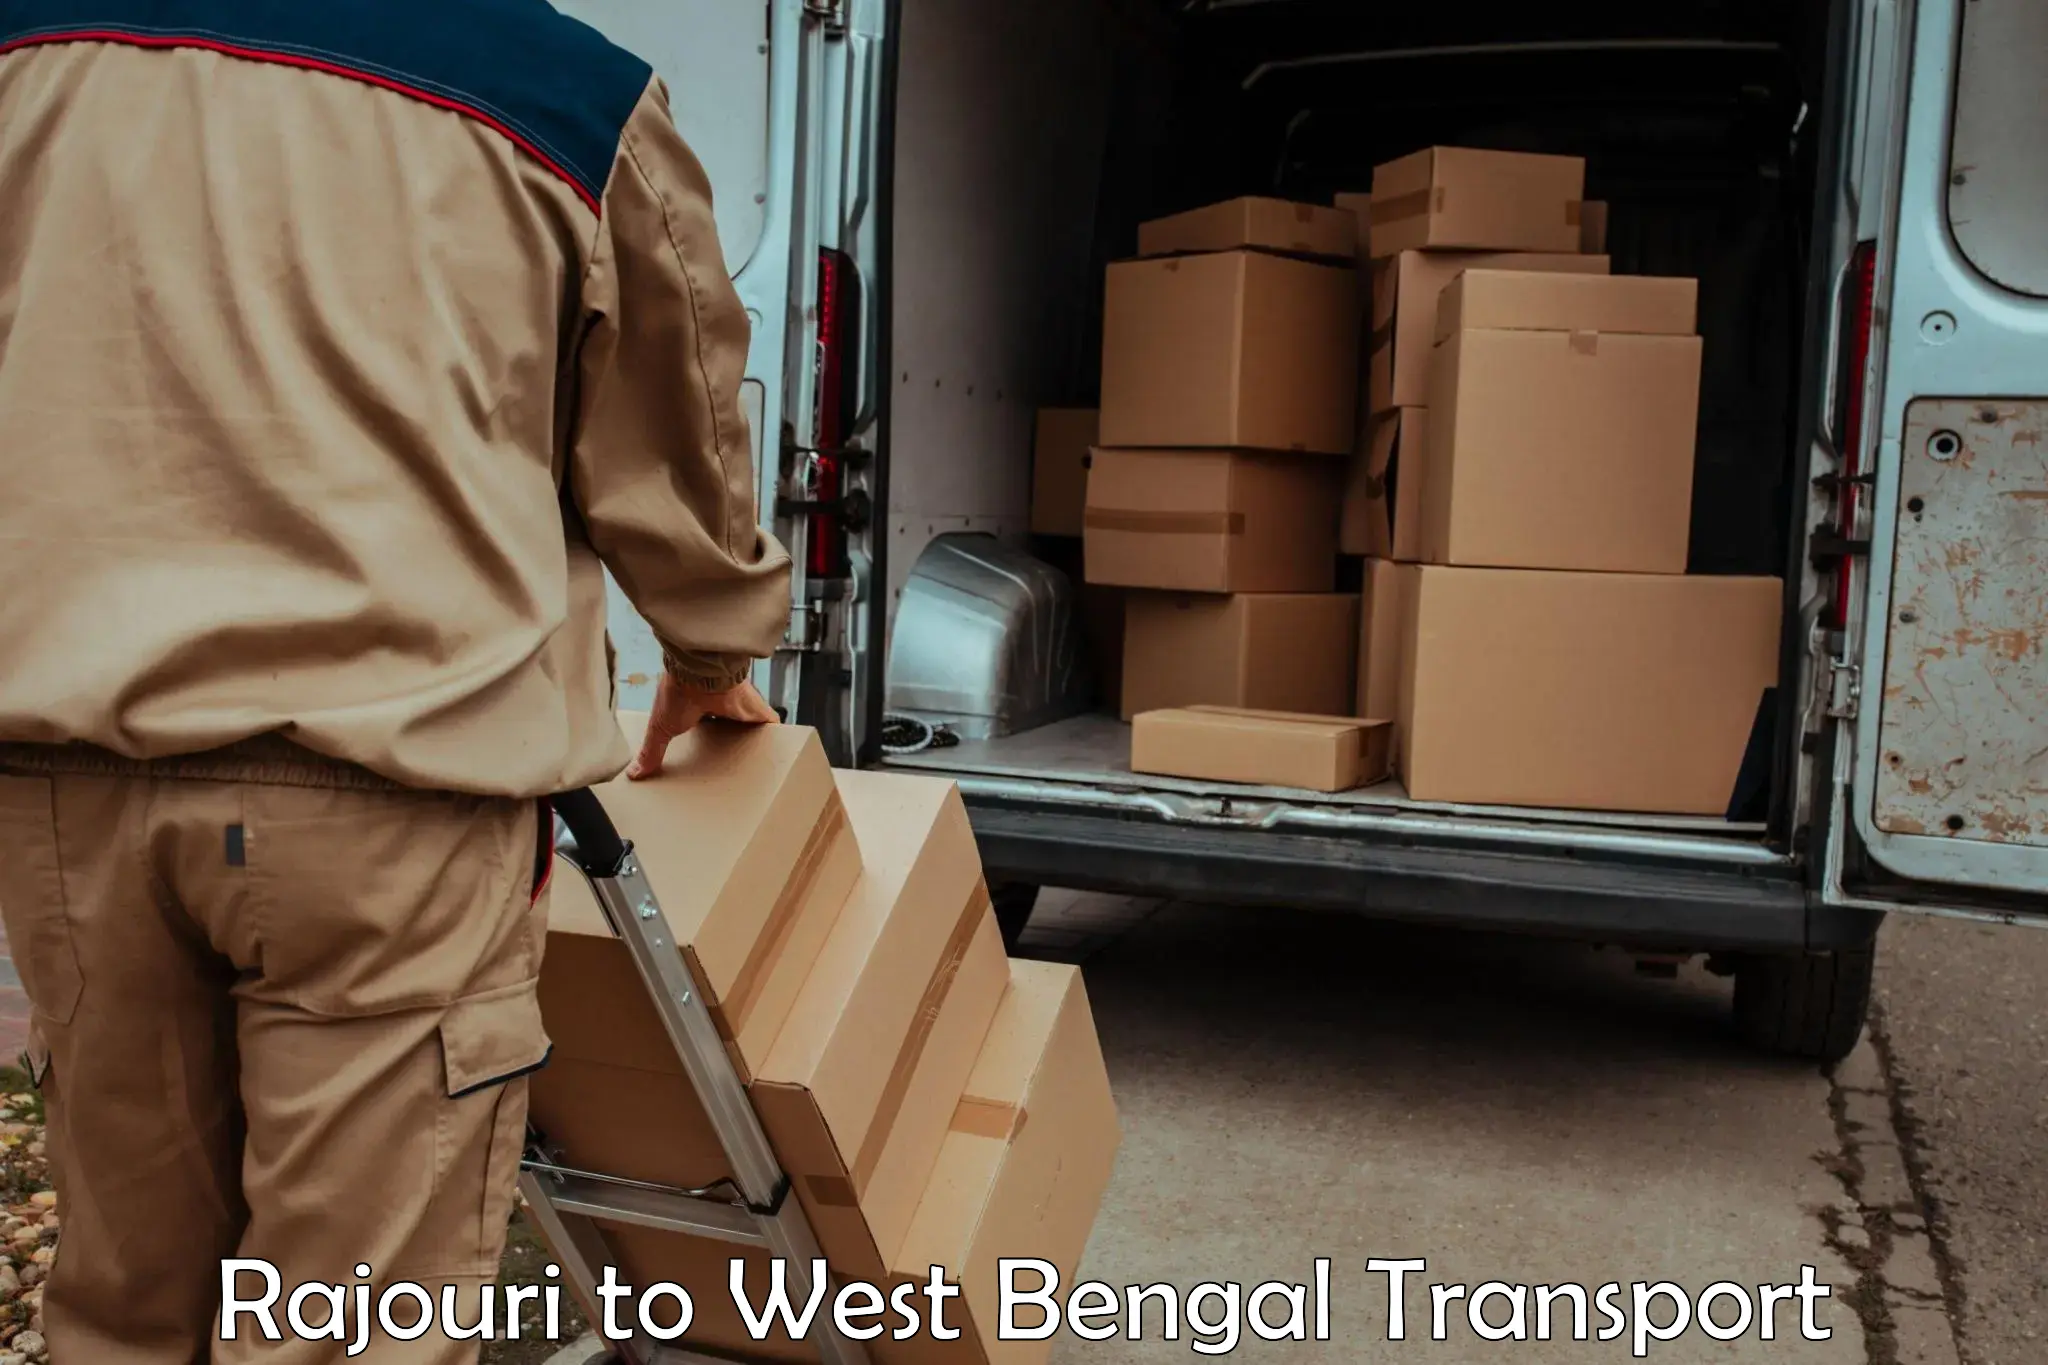 Cycle transportation service Rajouri to West Bengal